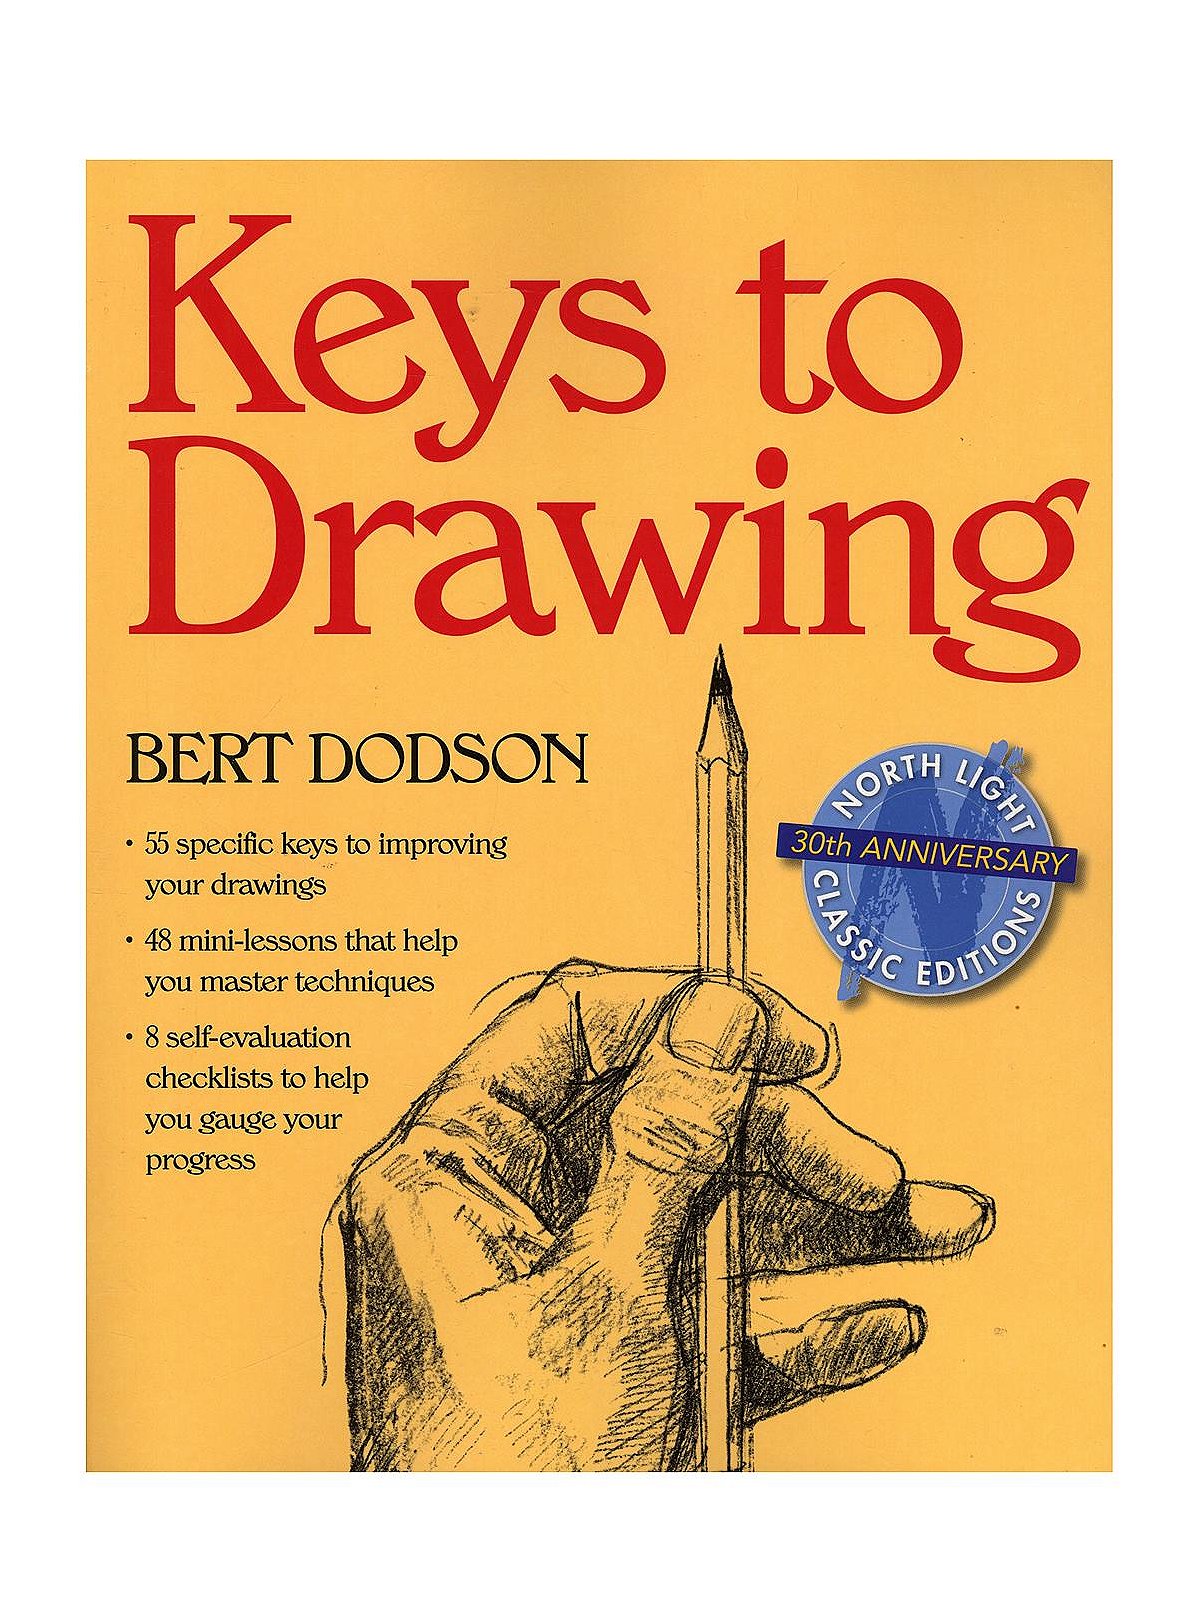 The Watercolour Log: Book Review - Keys to Drawing by Bert Dodson